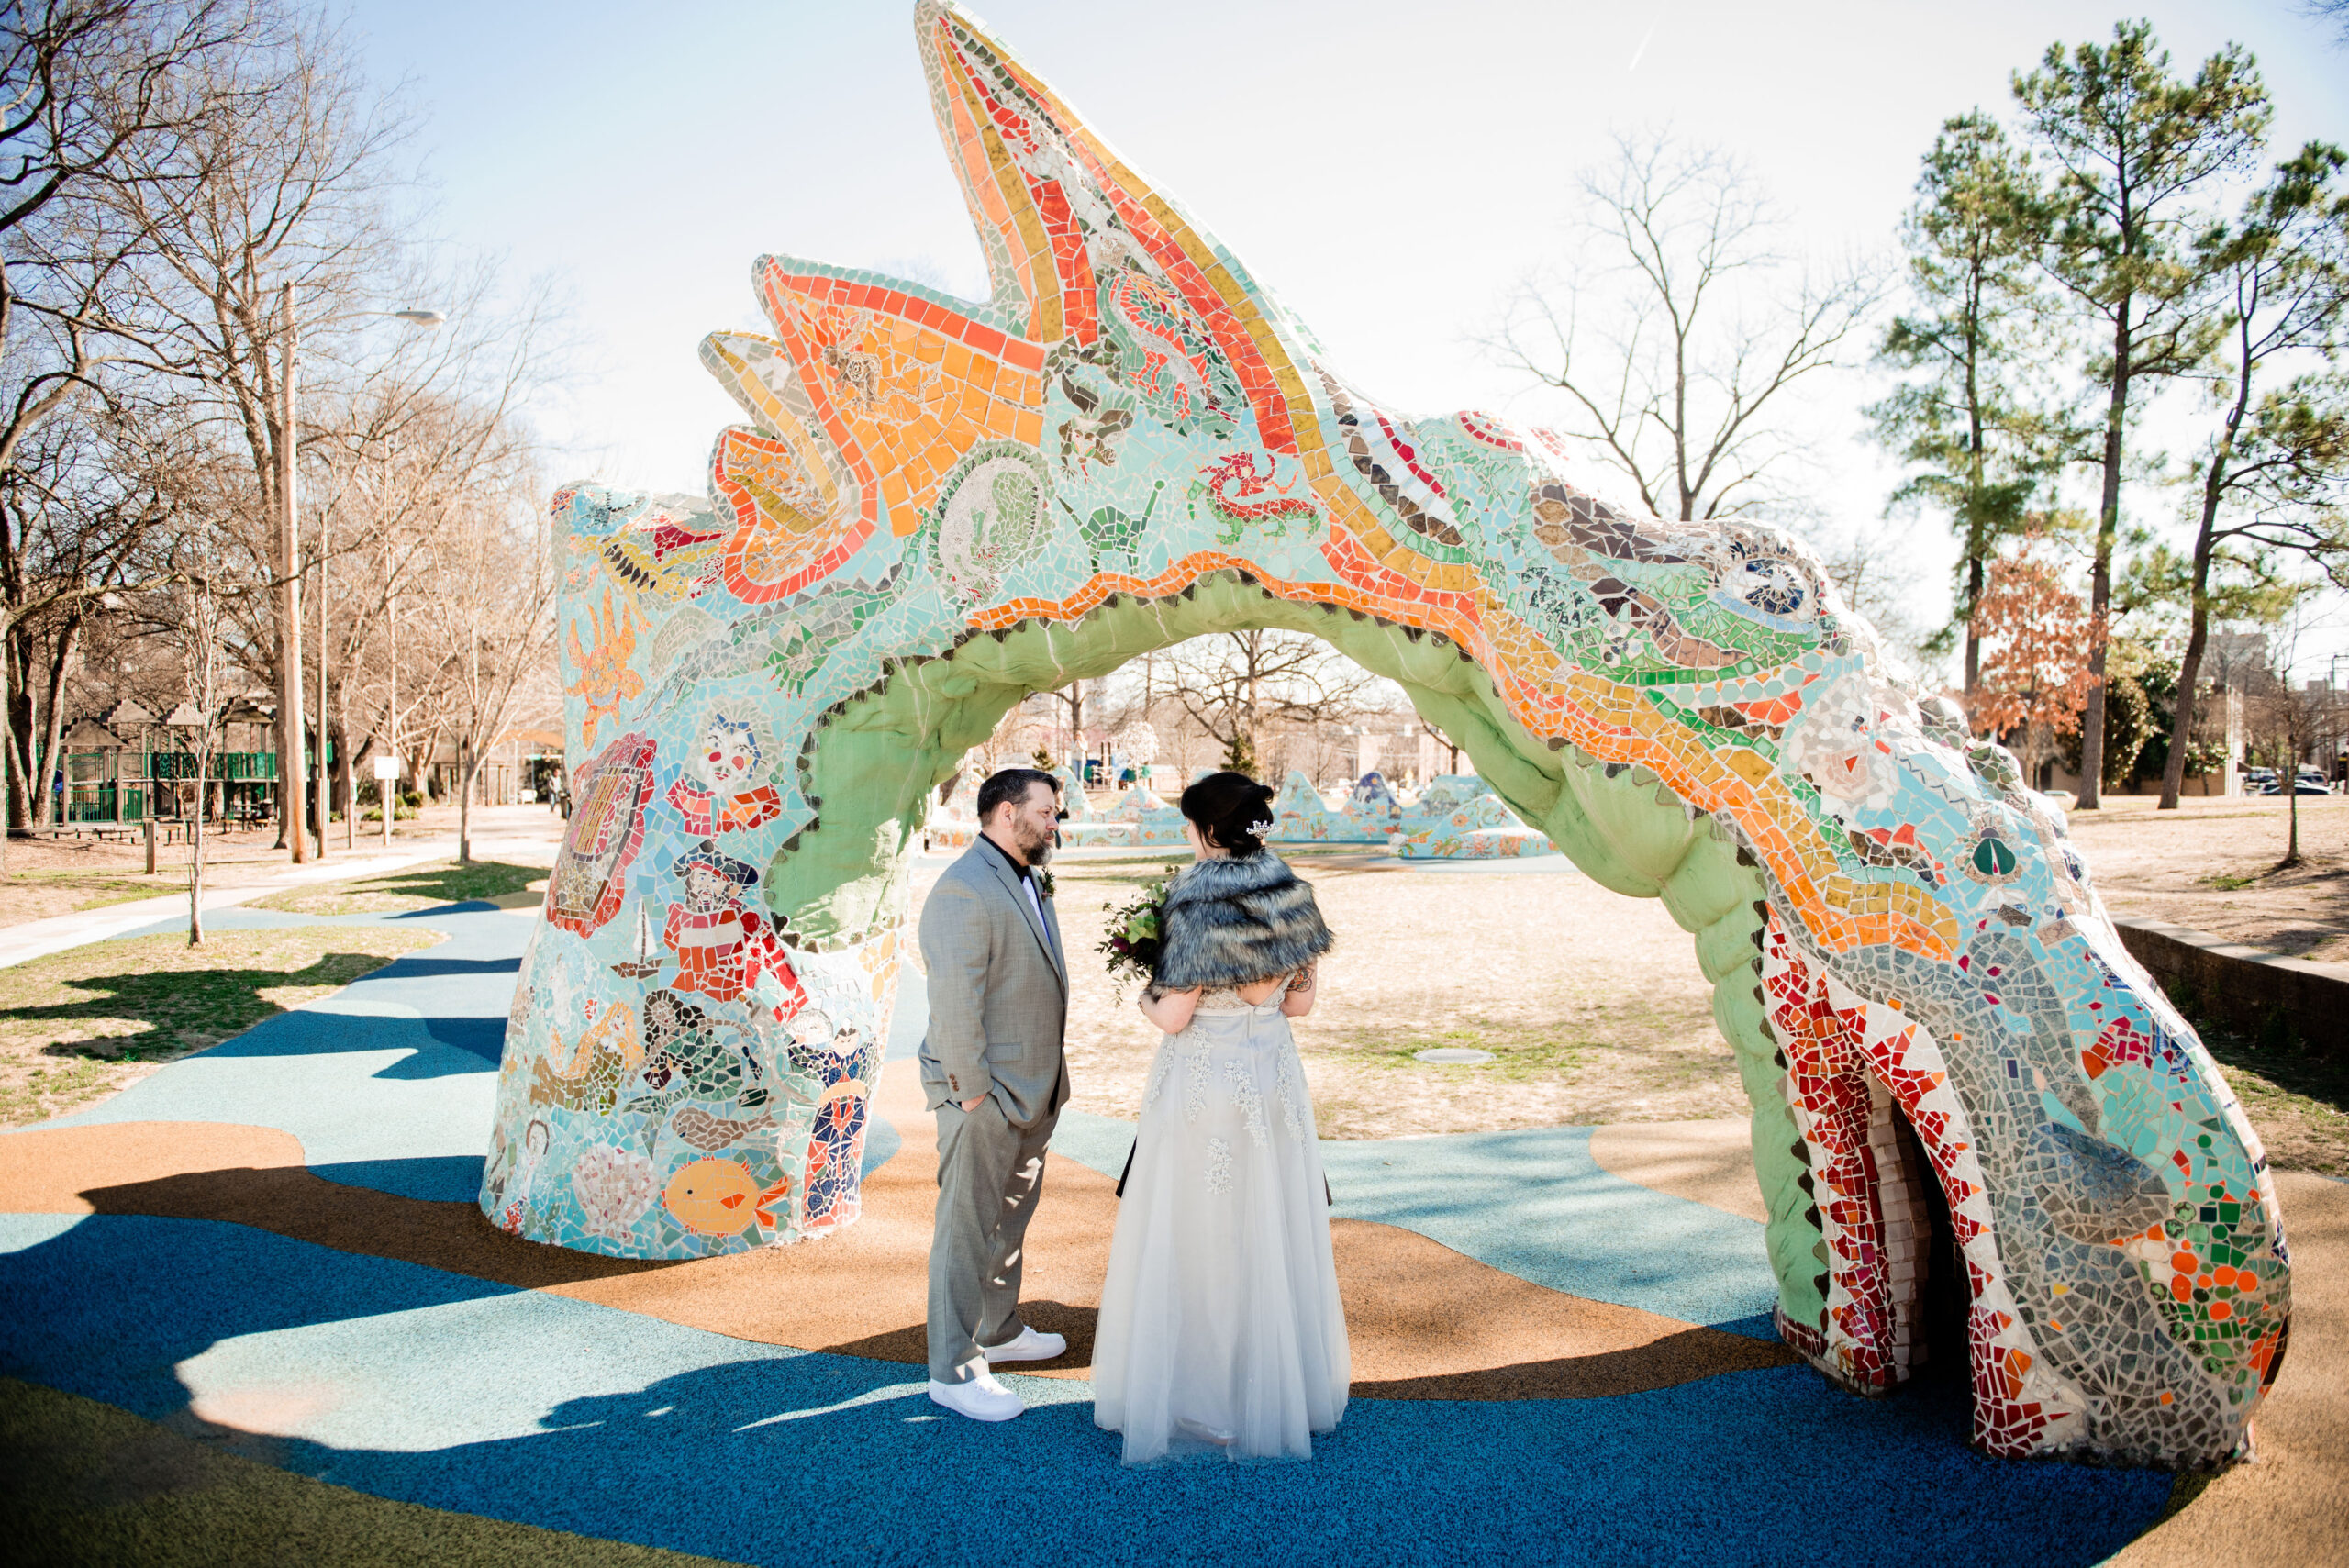 The bride, wearing a lace silver dress, and gray fur wrap holds a large bouquet as she faces the groom. The groom, wearing a gray suit with a black shirt, white tie and white and mauve boutonniere stands with his hands in his pockets facing the bride. They stand beneath a large mosaic dragon at Dragon Park in Nashville. 